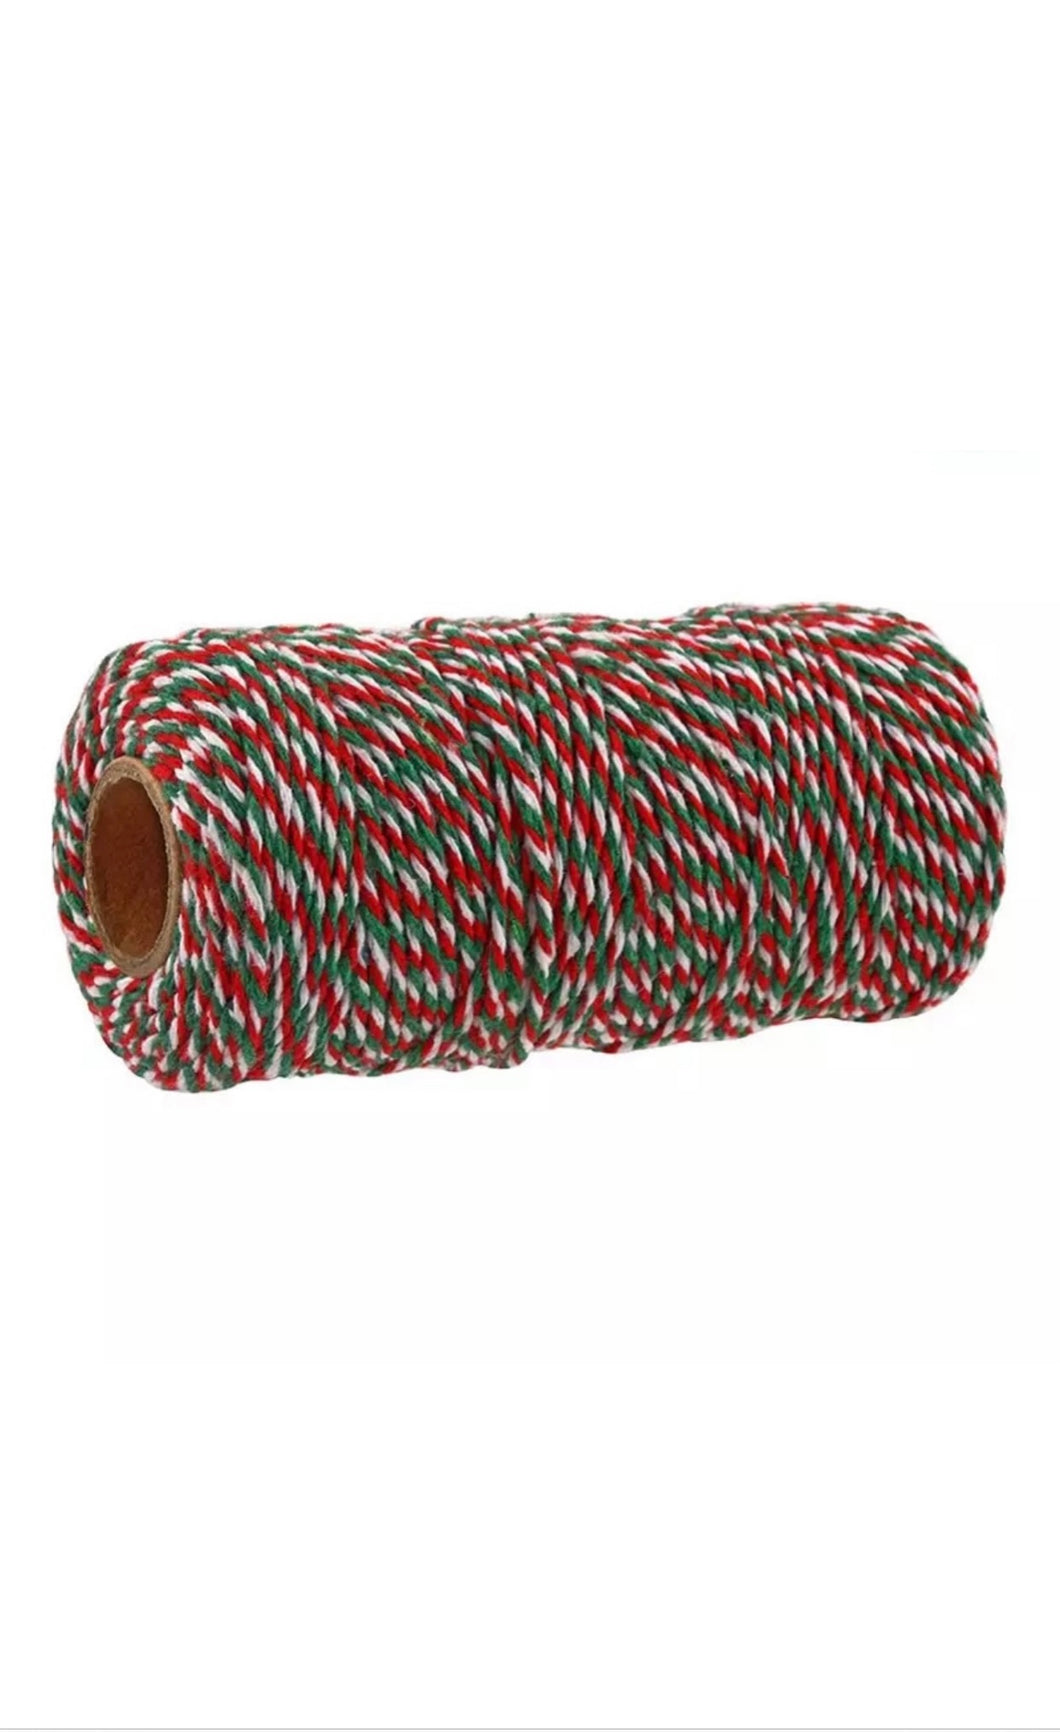 Bakers Twine 100m - Red/Green/White